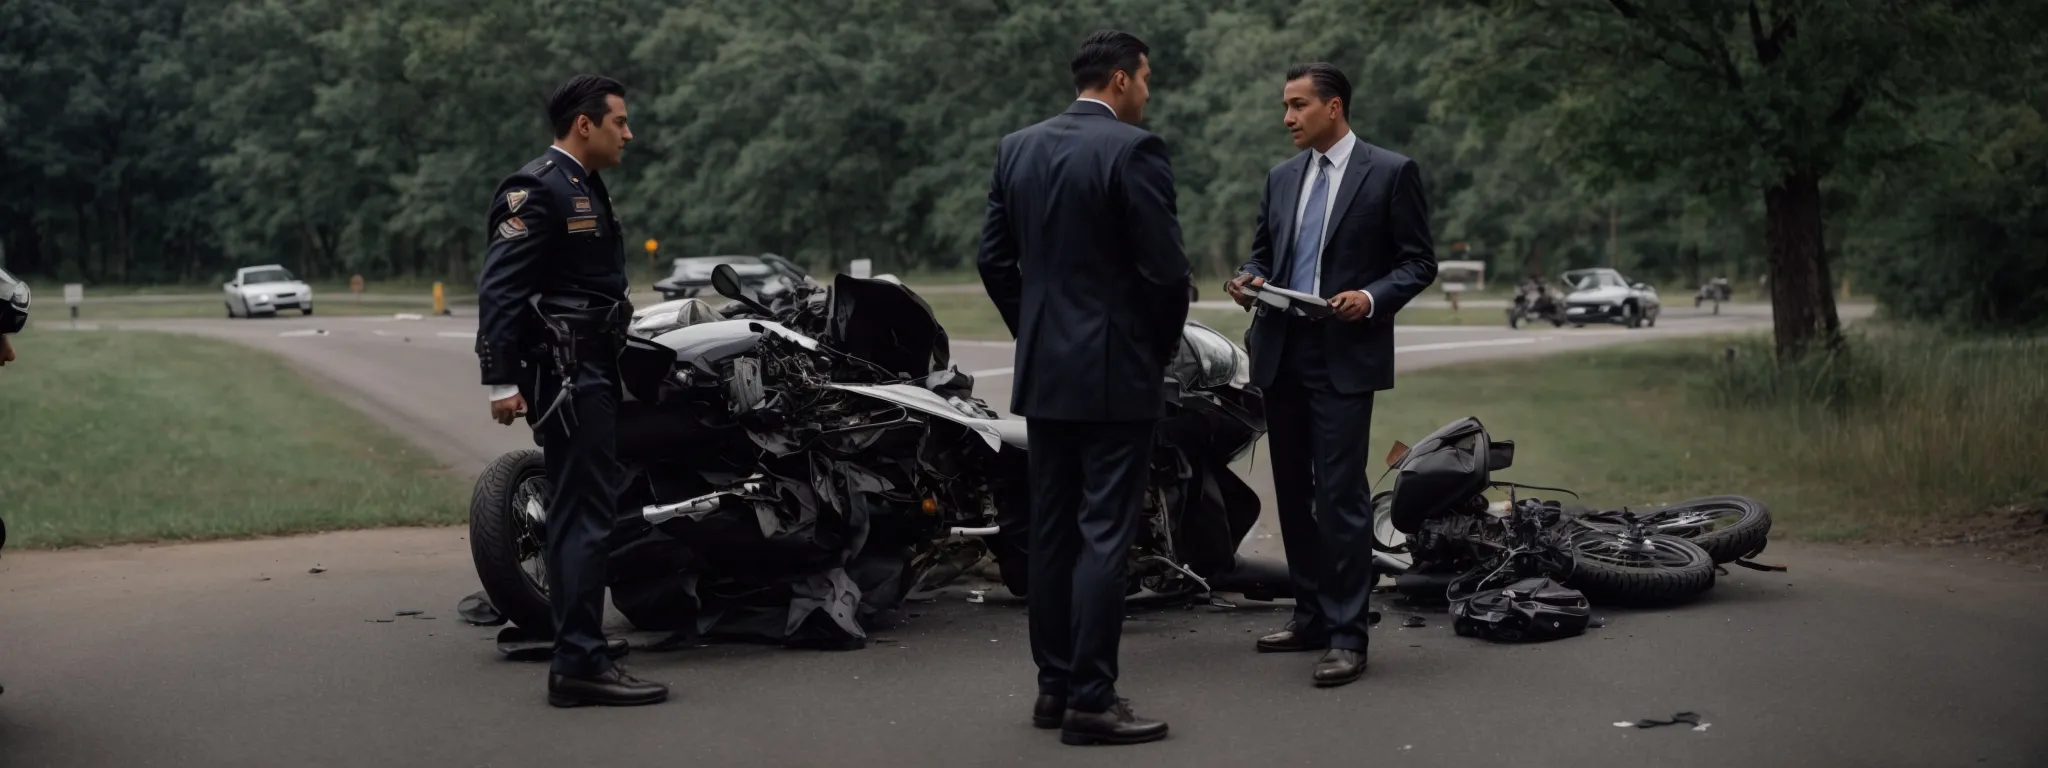 two motorcyclists in conversation with a sharply dressed lawyer beside a crashed motorcycle at the scene of an accident.